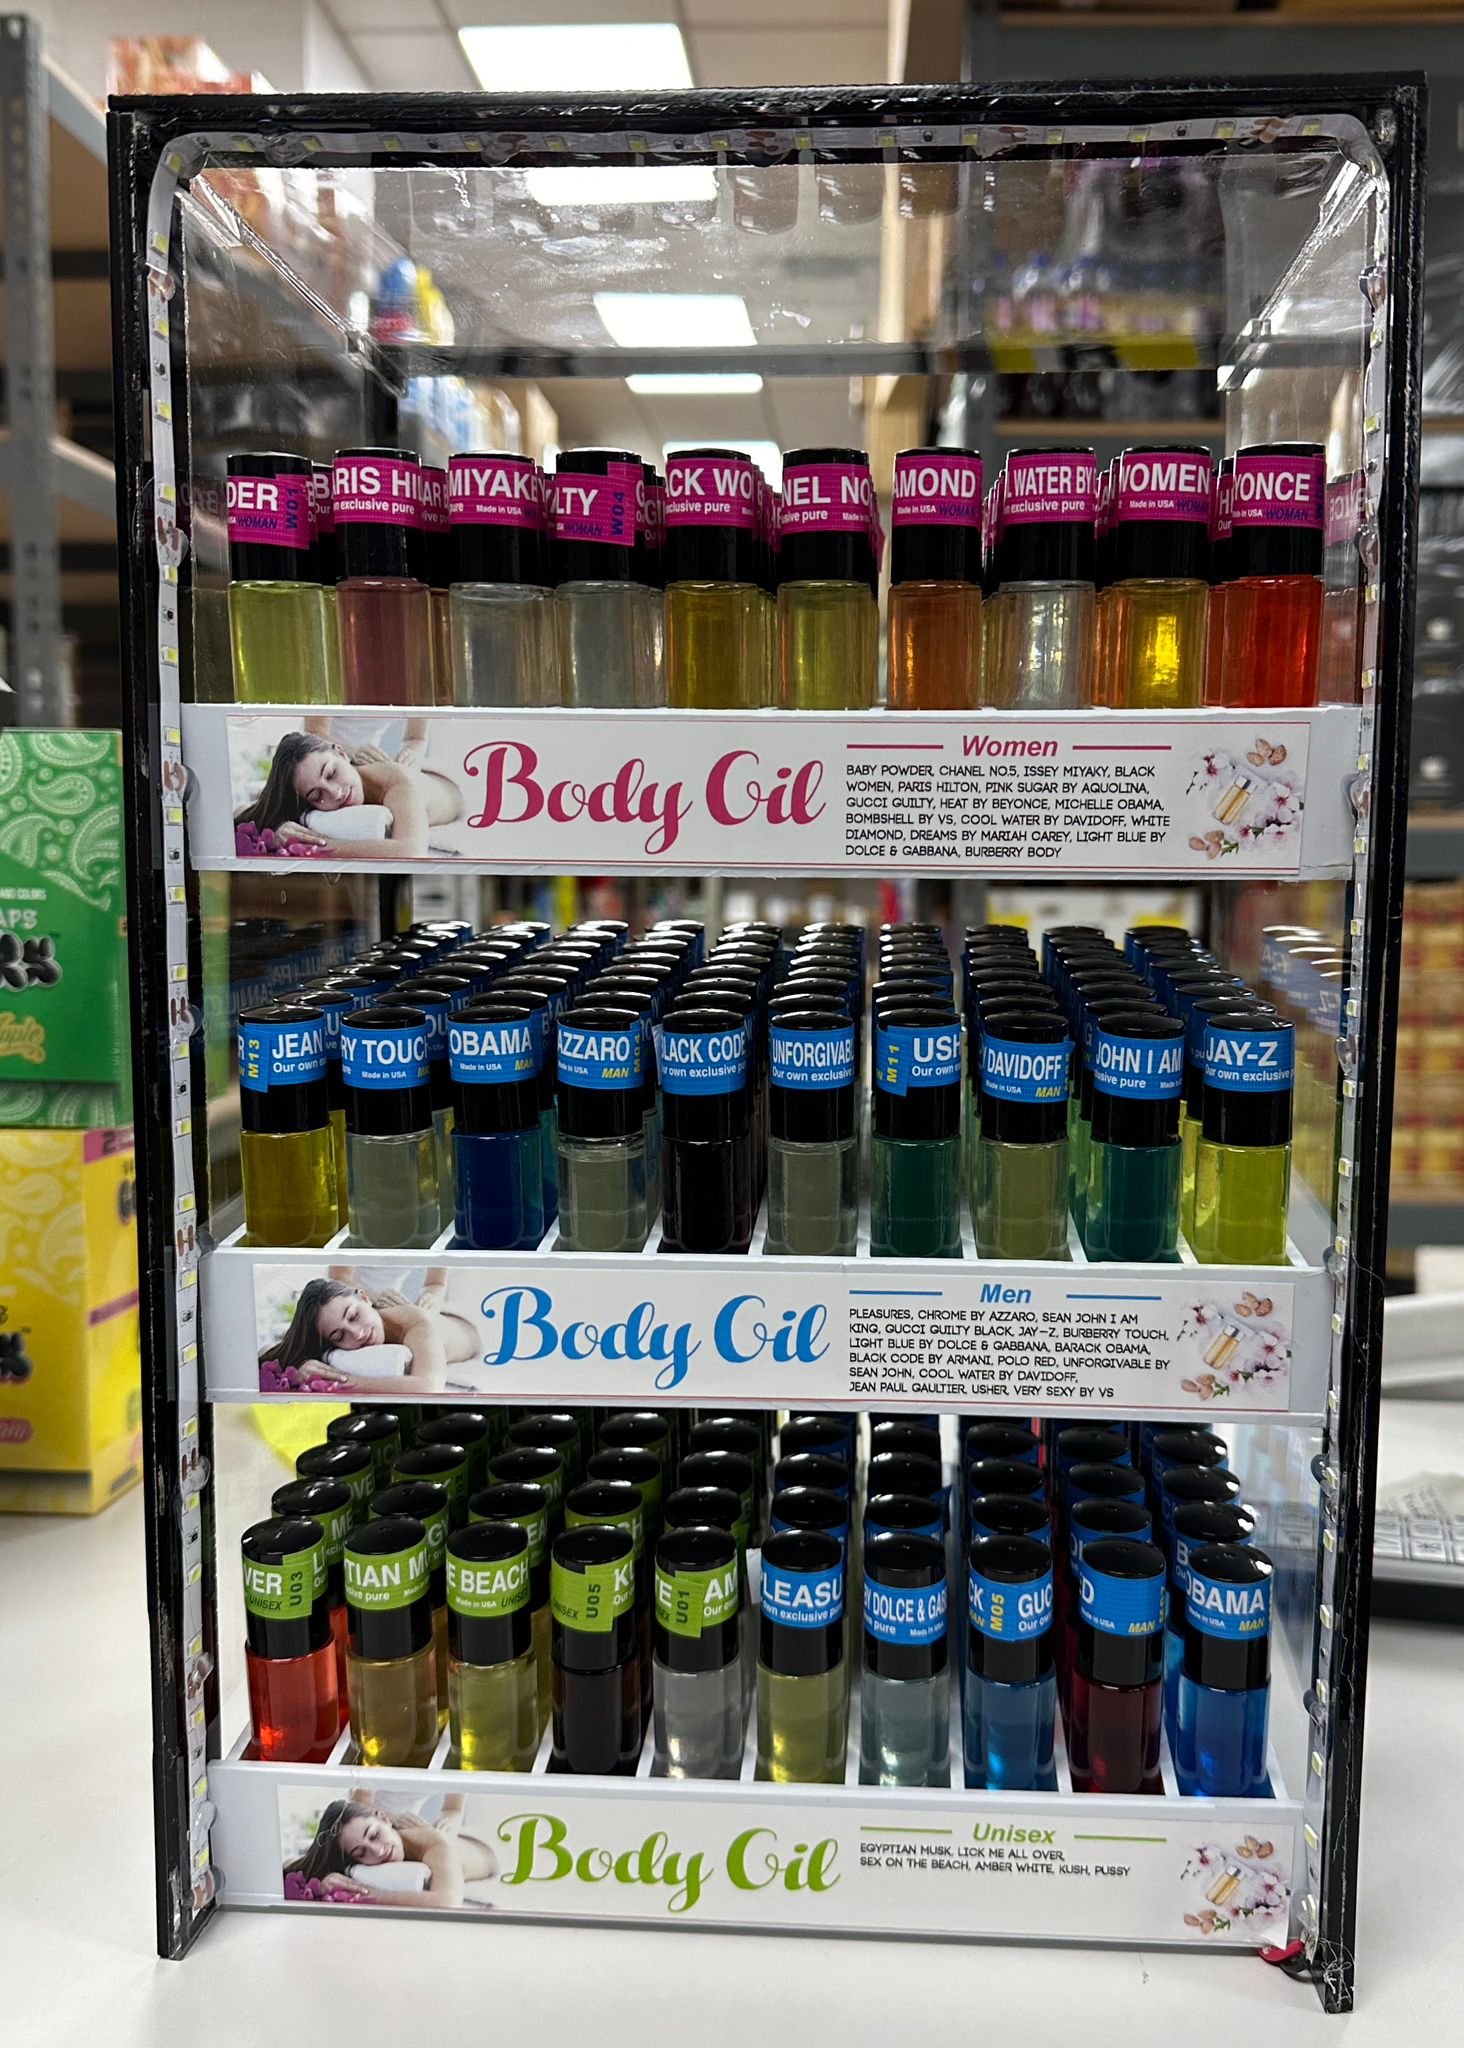 BODY GIL BODY OIL 240 CT DISPLAY WITH LED